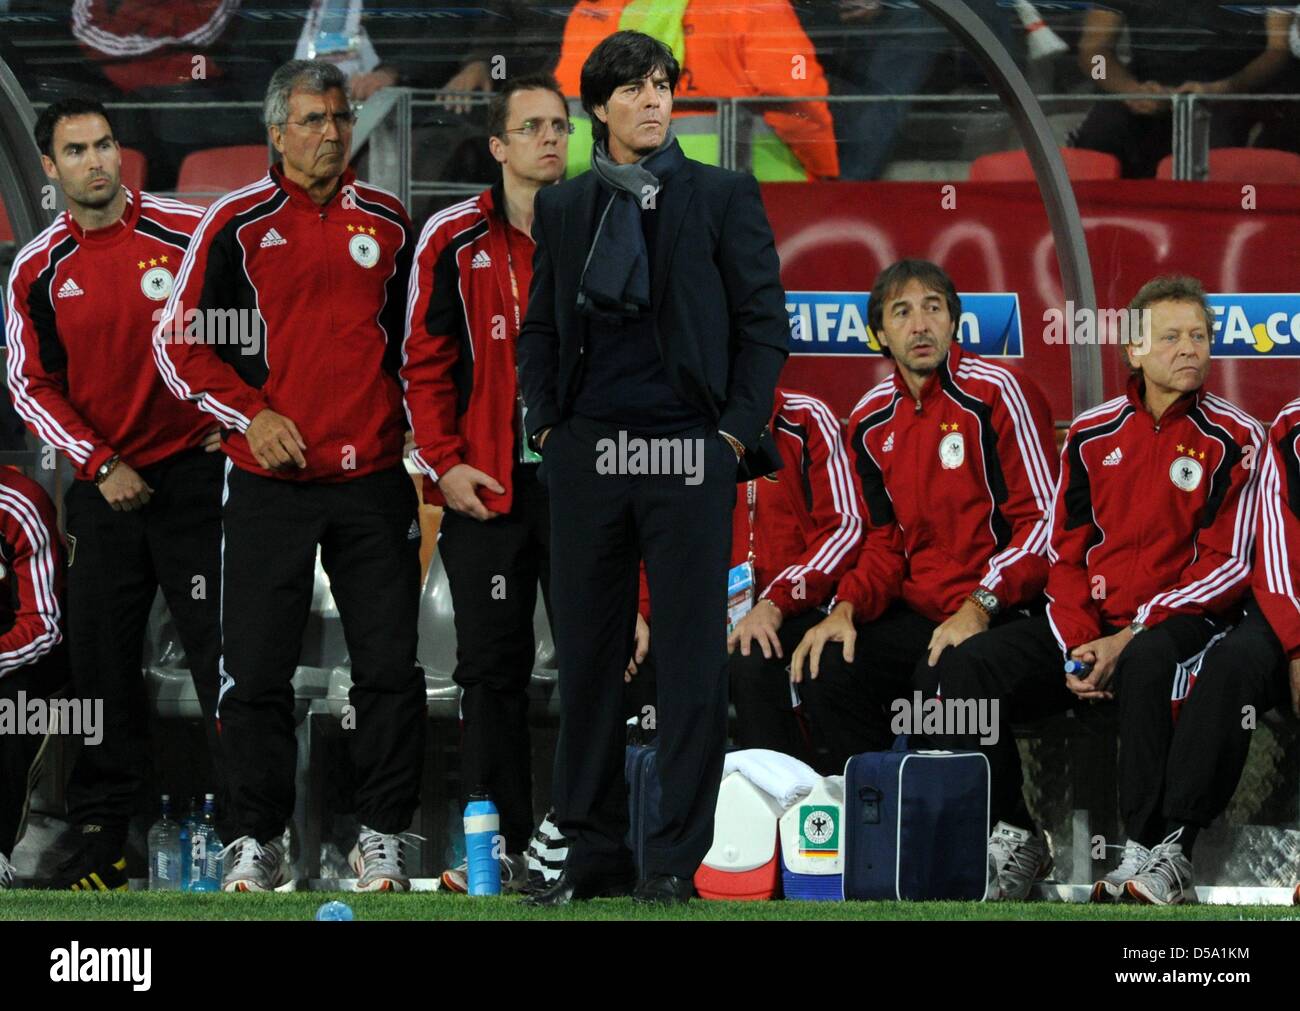 German coach Joachim Loew (C) stands in front of the bench during the 2010 FIFA World Cup third place match between Uruguay and Germany at the Nelson Mandela Bay Stadium in Port Elizabeth, South Africa 10 July 2010. Photo: Marcus Brandt dpa - Please refer to http://dpaq.de/FIFA-WM2010-TC Stock Photo